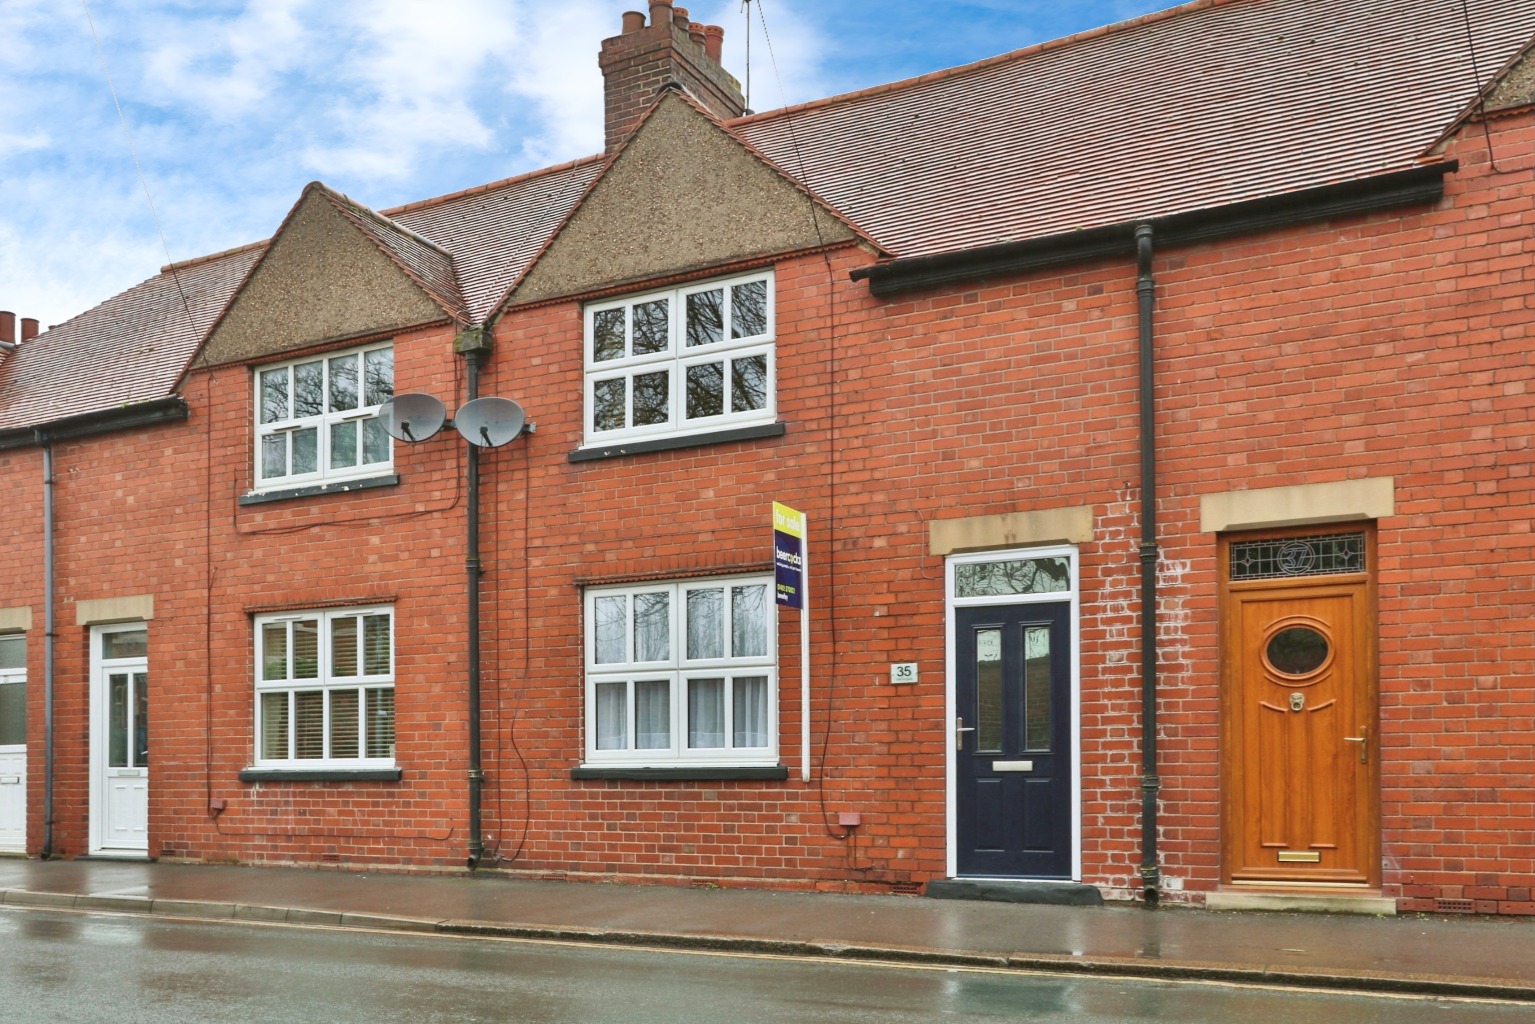 2 bed terraced house for sale in Flemingate, Beverley - Property Image 1